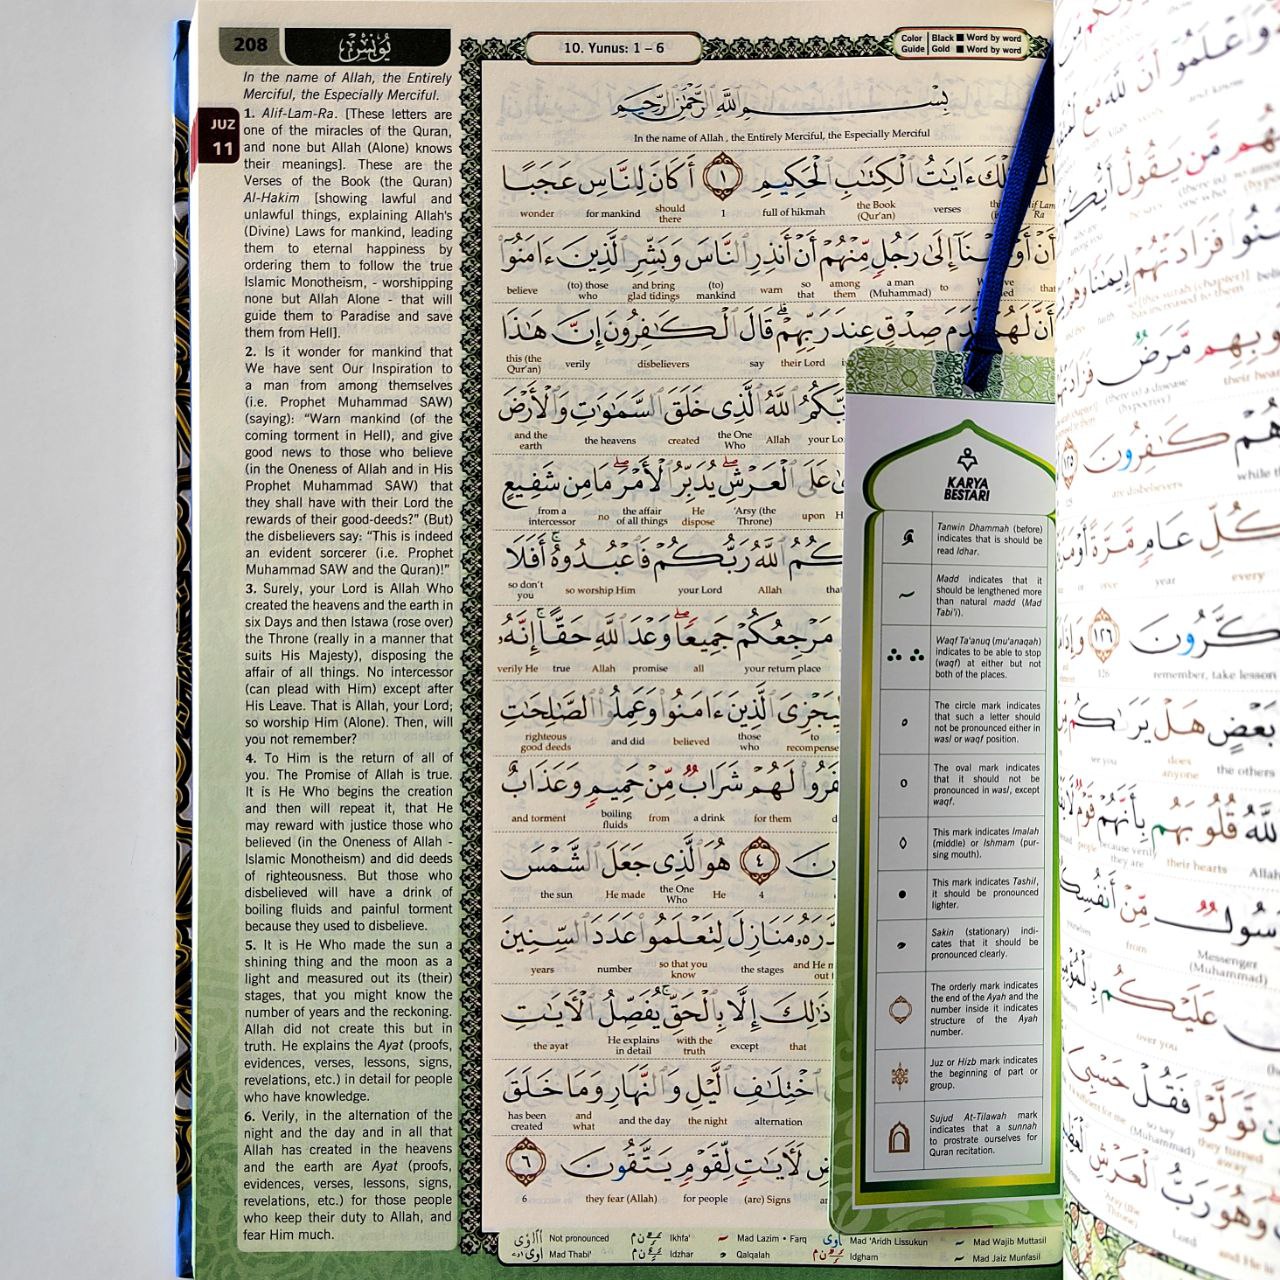 The Noble Quran A4 (English Translation Word by Word)